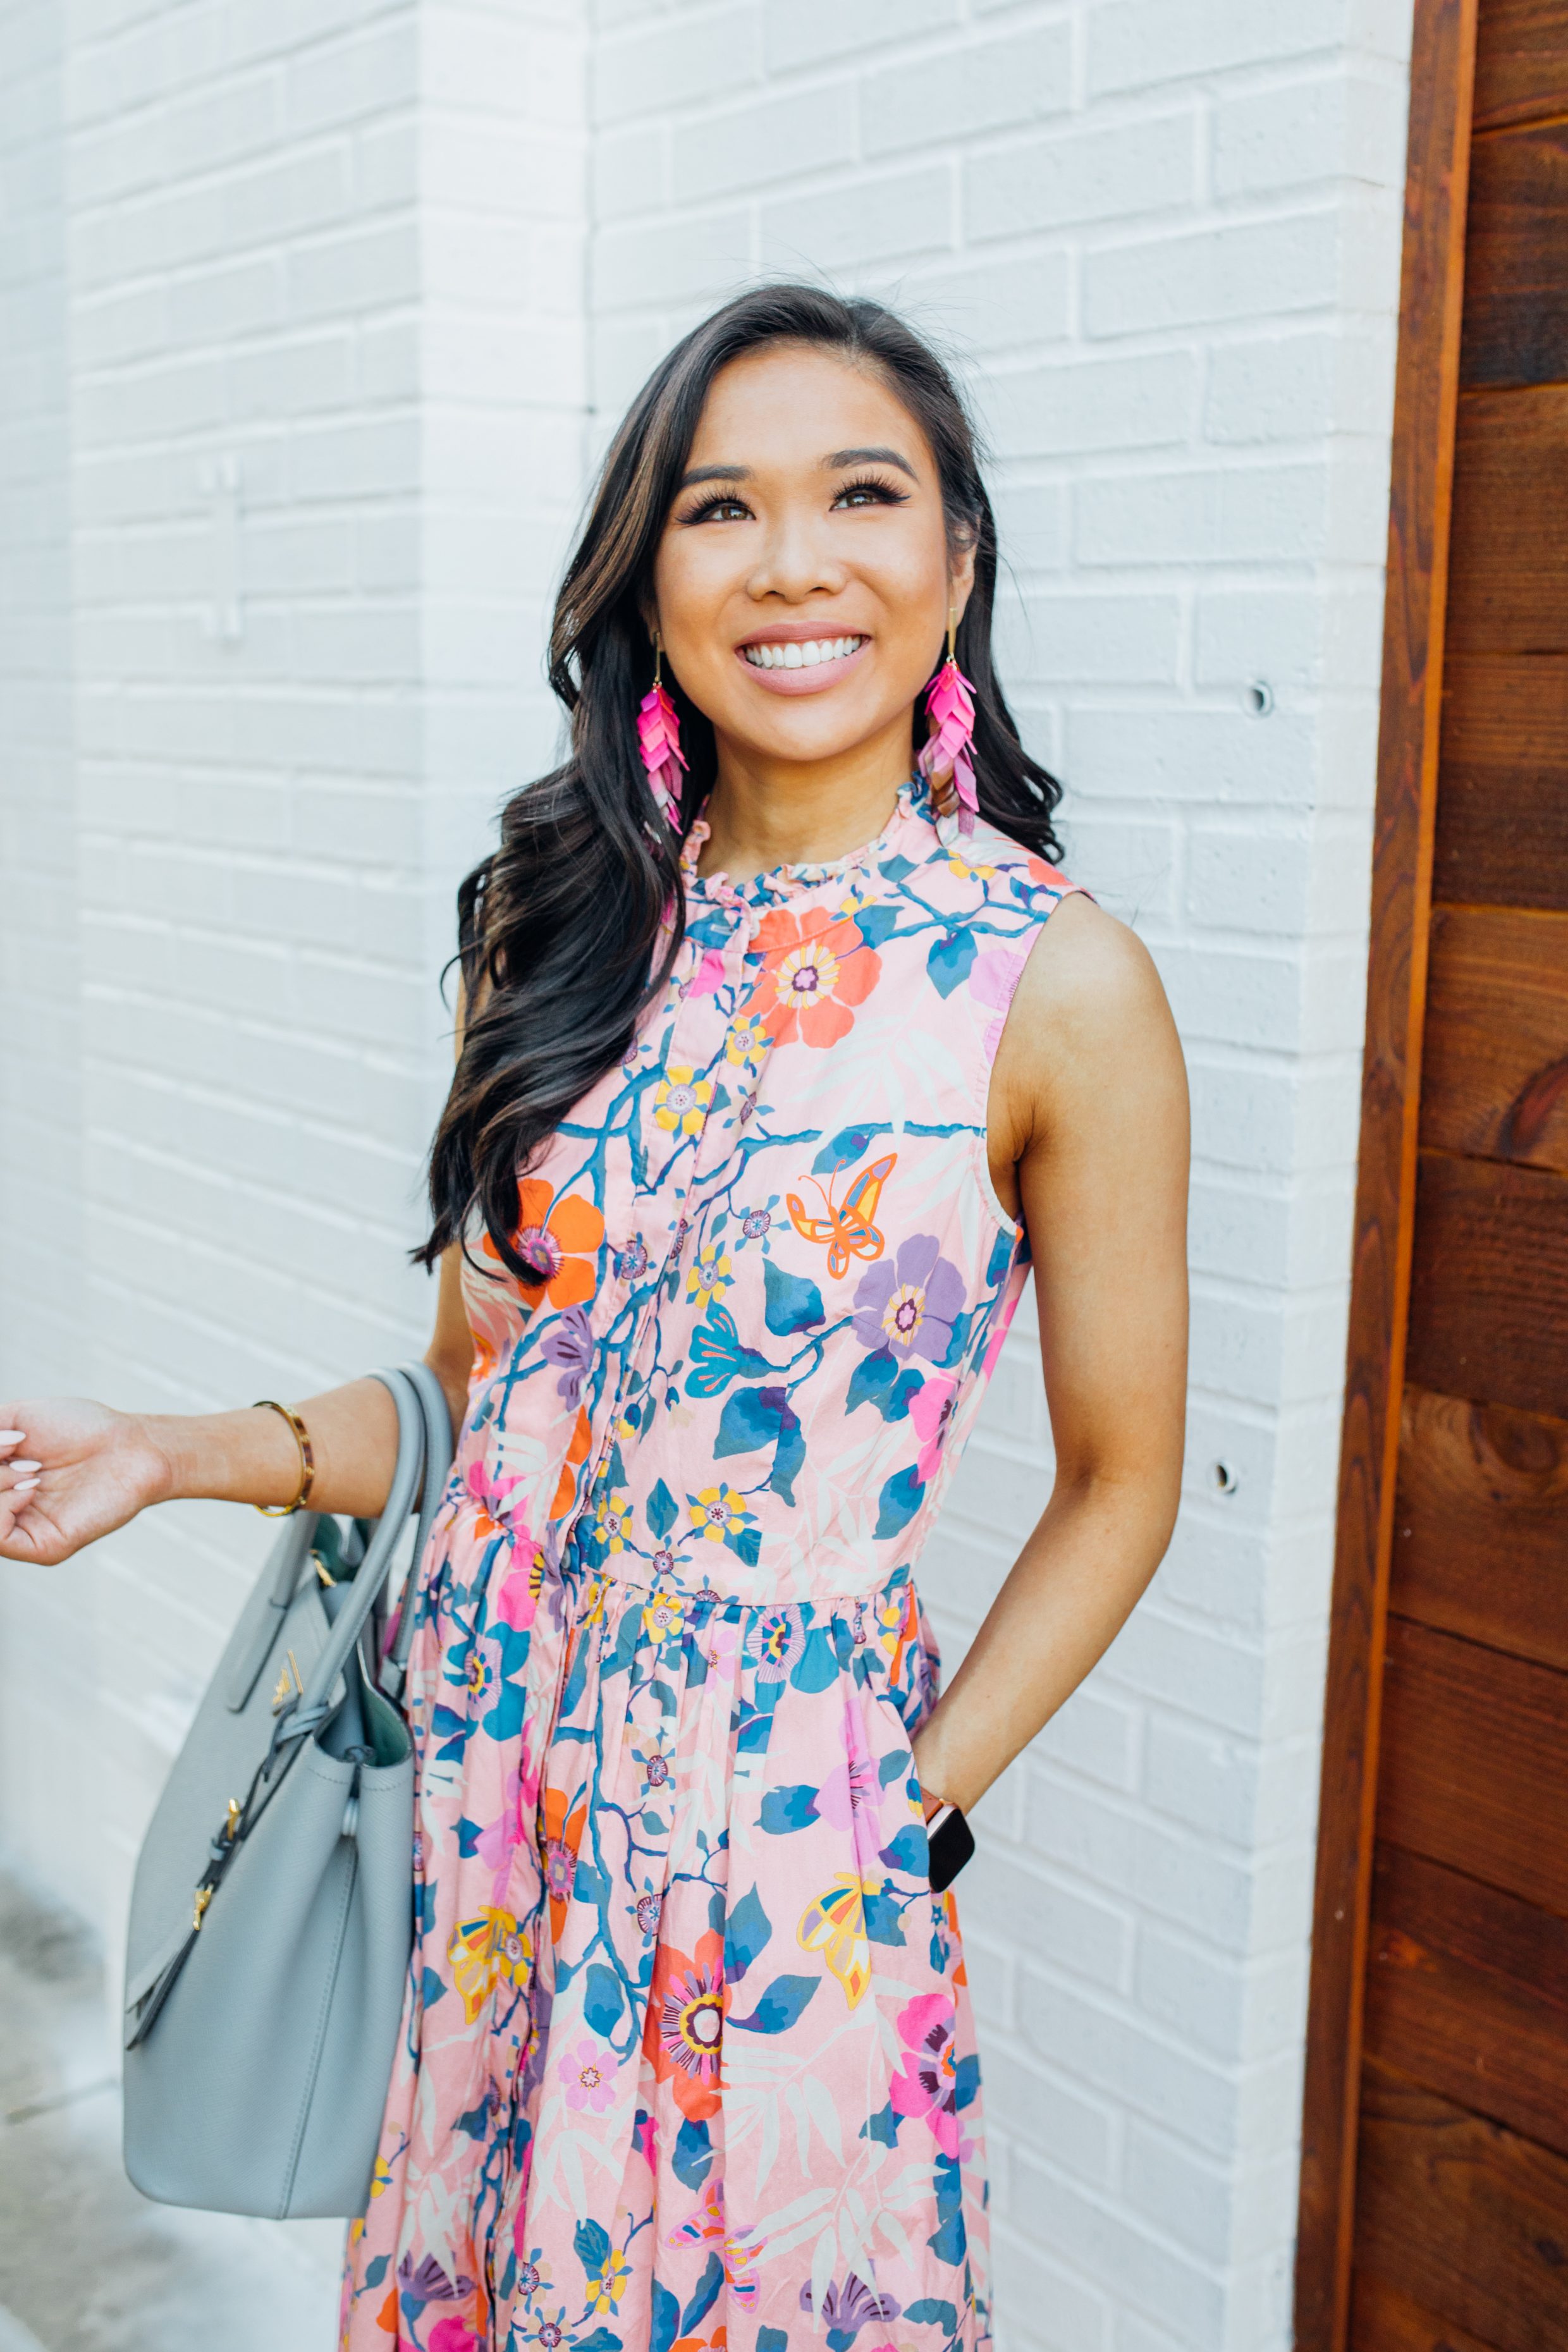 Blogger Hoang-Kim shares a summer outfit idea with a floral shirtdress